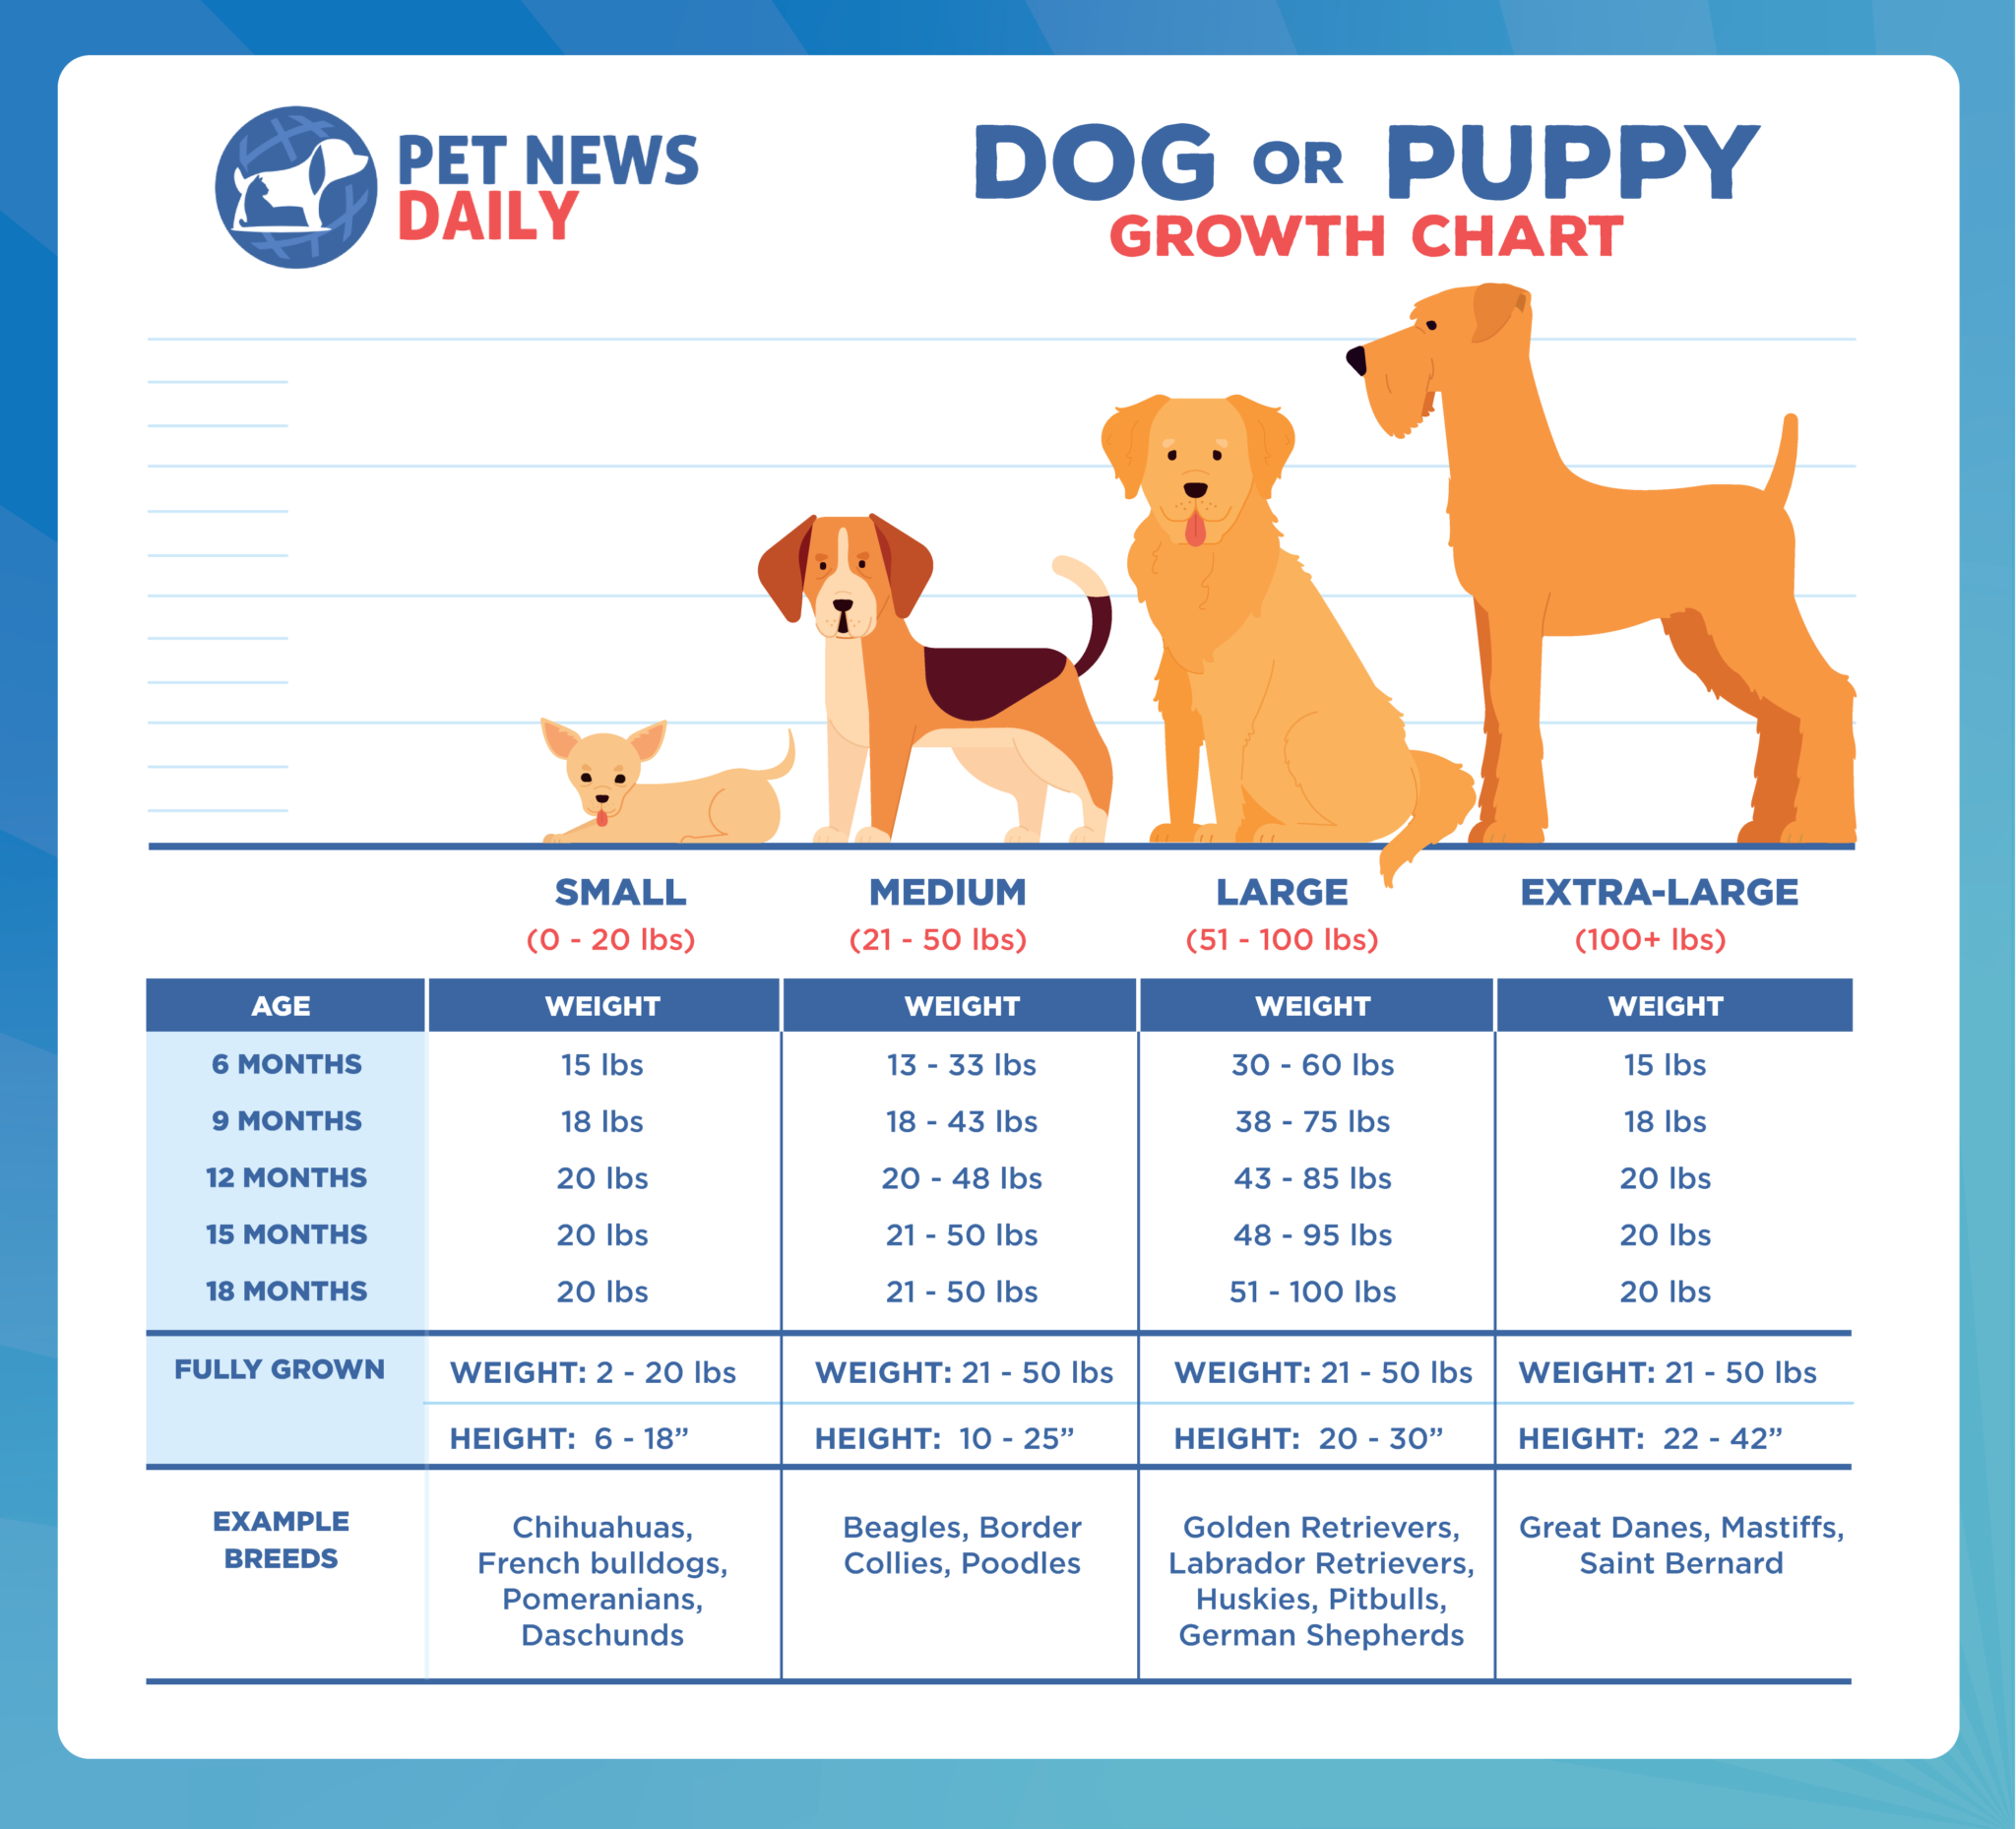 Dog (or Puppy) Growth Chart How Big Will Your Puppy Get? Pet News Daily